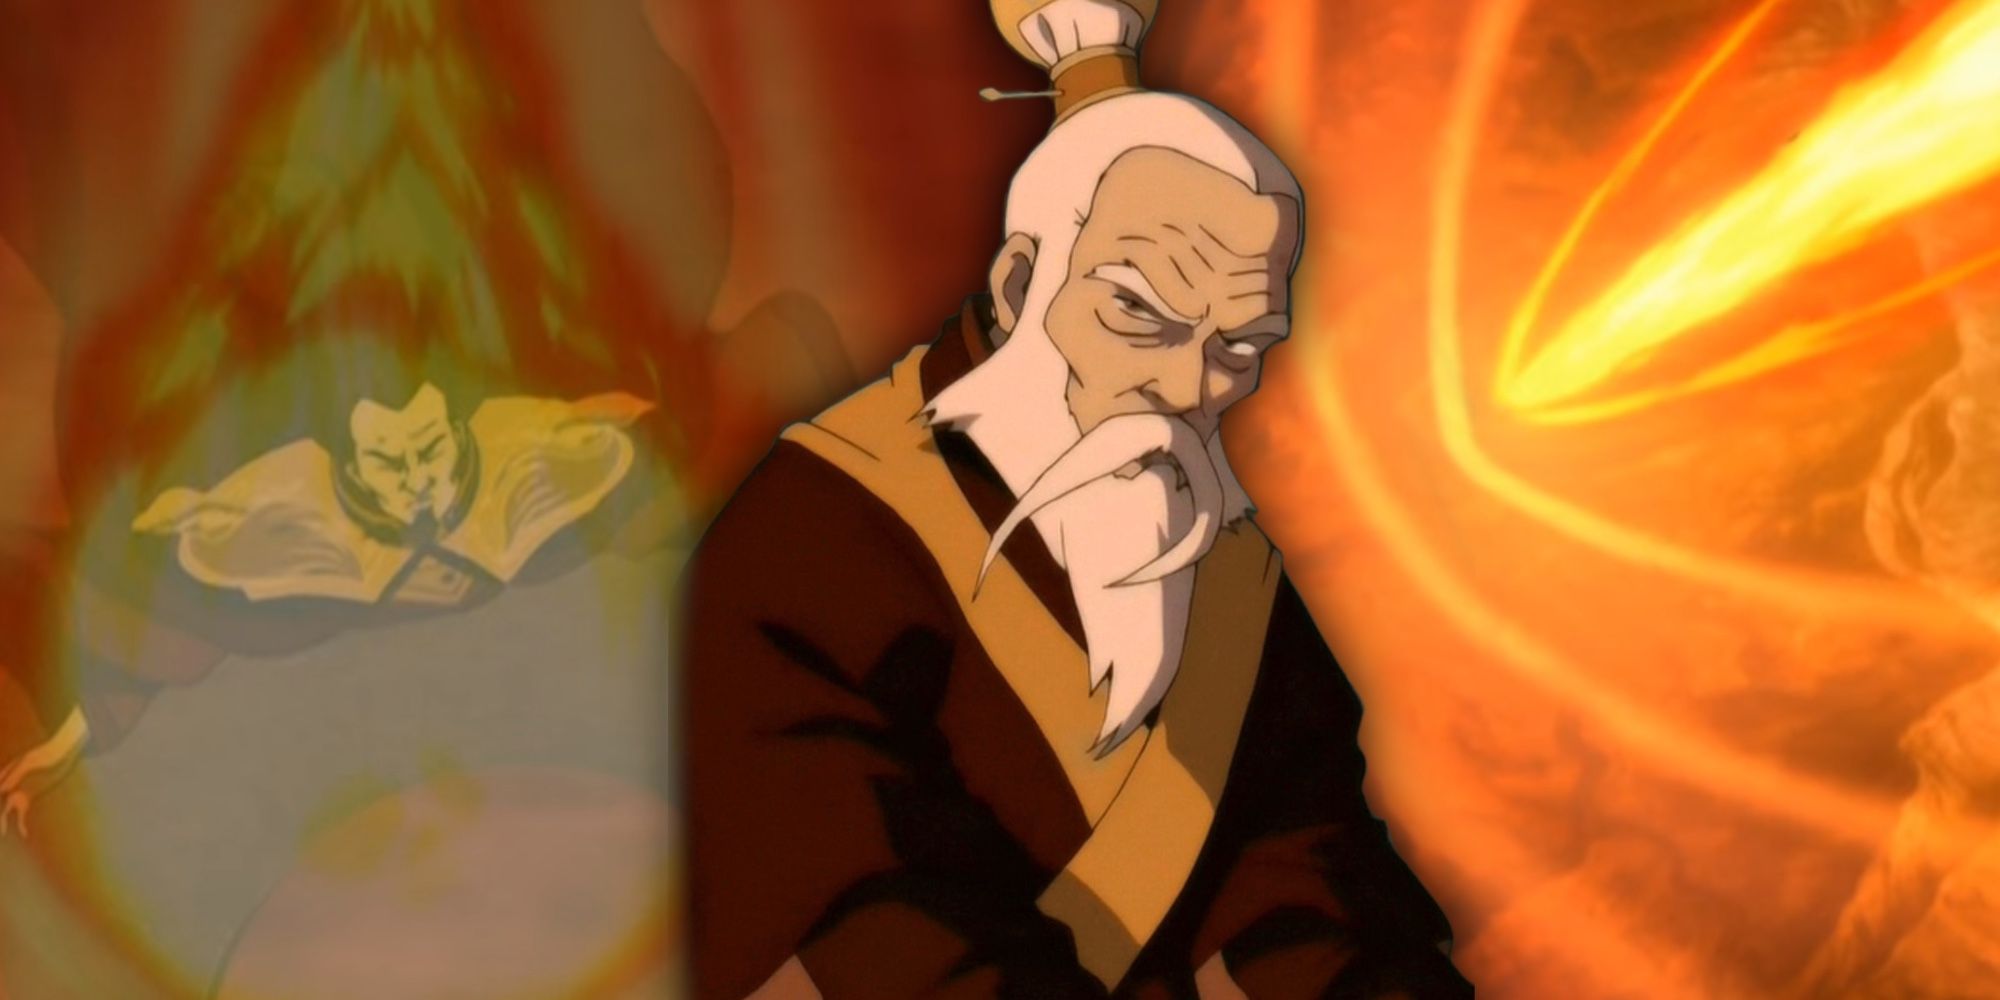 Fire Lord Ozai Given Firebender Power By Sozin's Comet in Avatar the Last Airbender